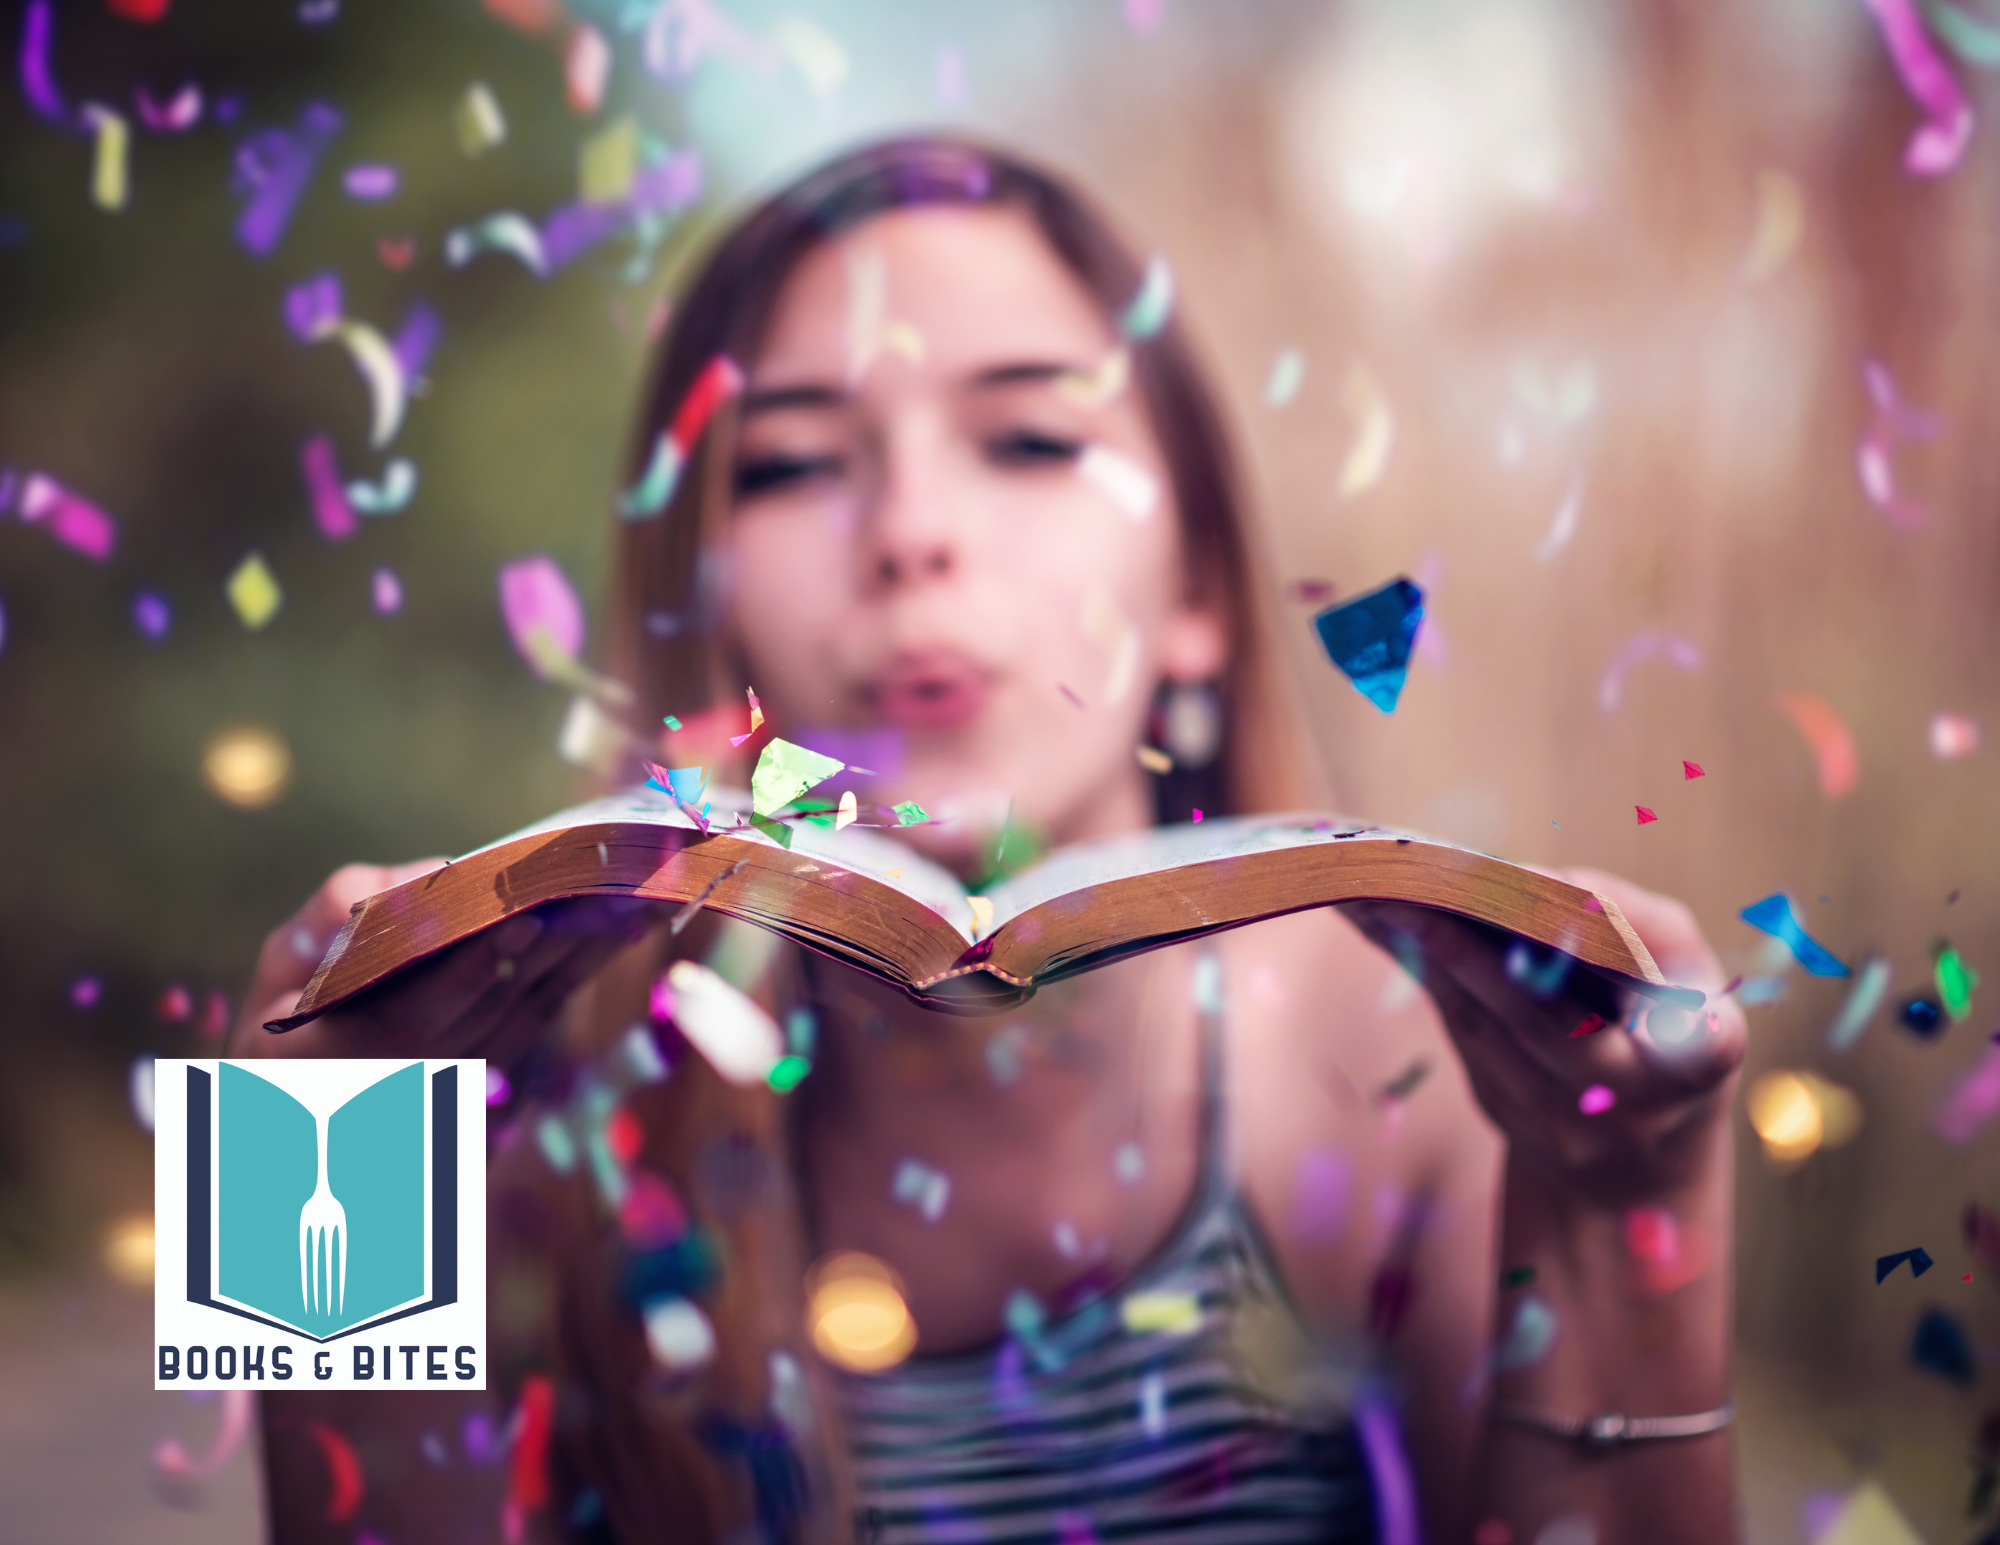 A young woman blows party confetti over a book.